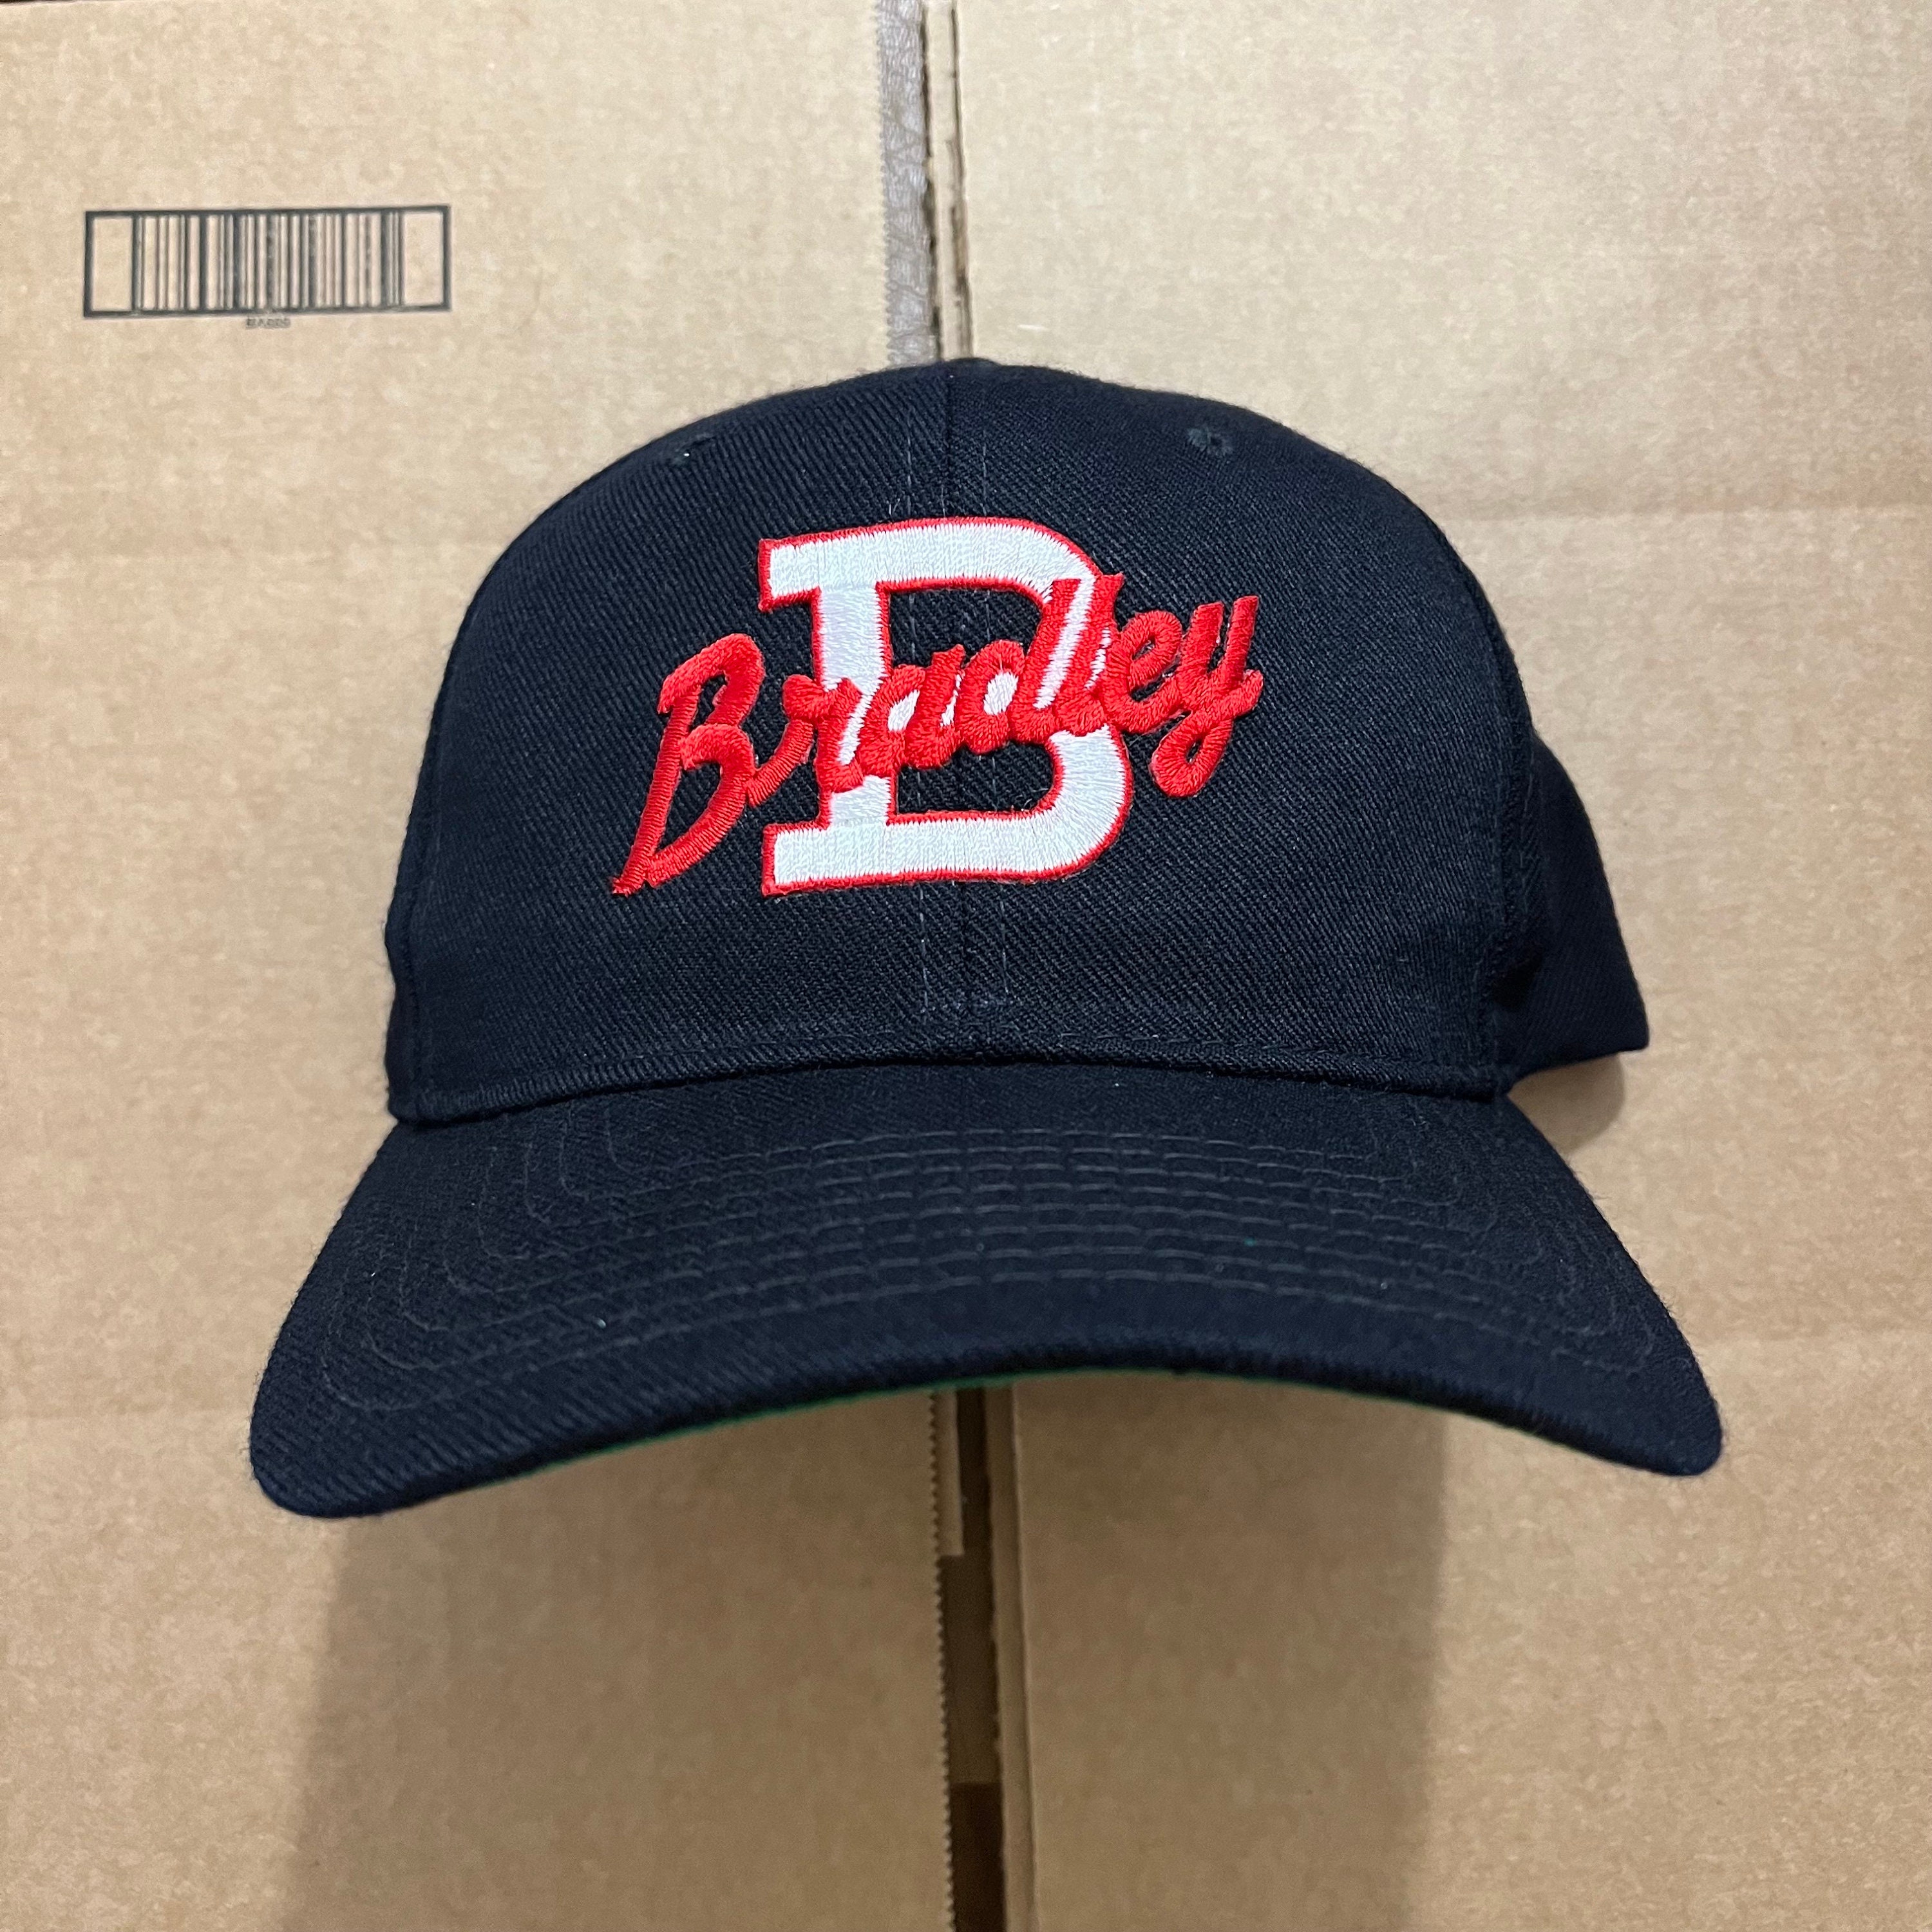 Best Vintage Collectable 1995 Championship Atlanta Braves Hats for sale in  Thomaston, Georgia for 2023